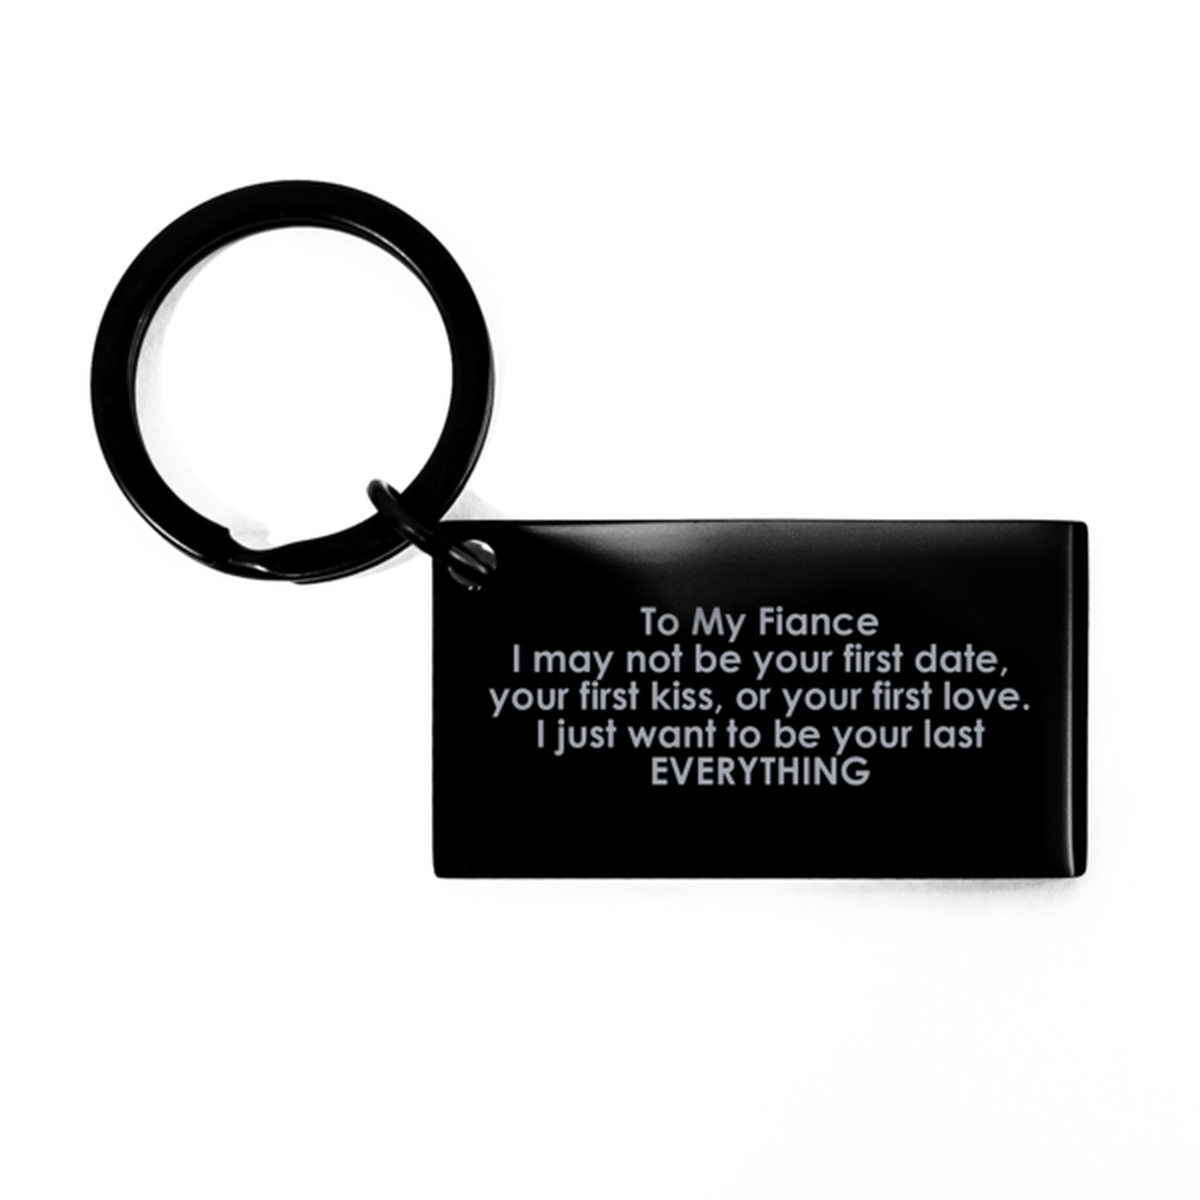 To My Fiance Black Keychain, I Just Want To Be You Last Everything, Valentines  Gifts For Fiance From Fiancee, Birthday Gifts For Men